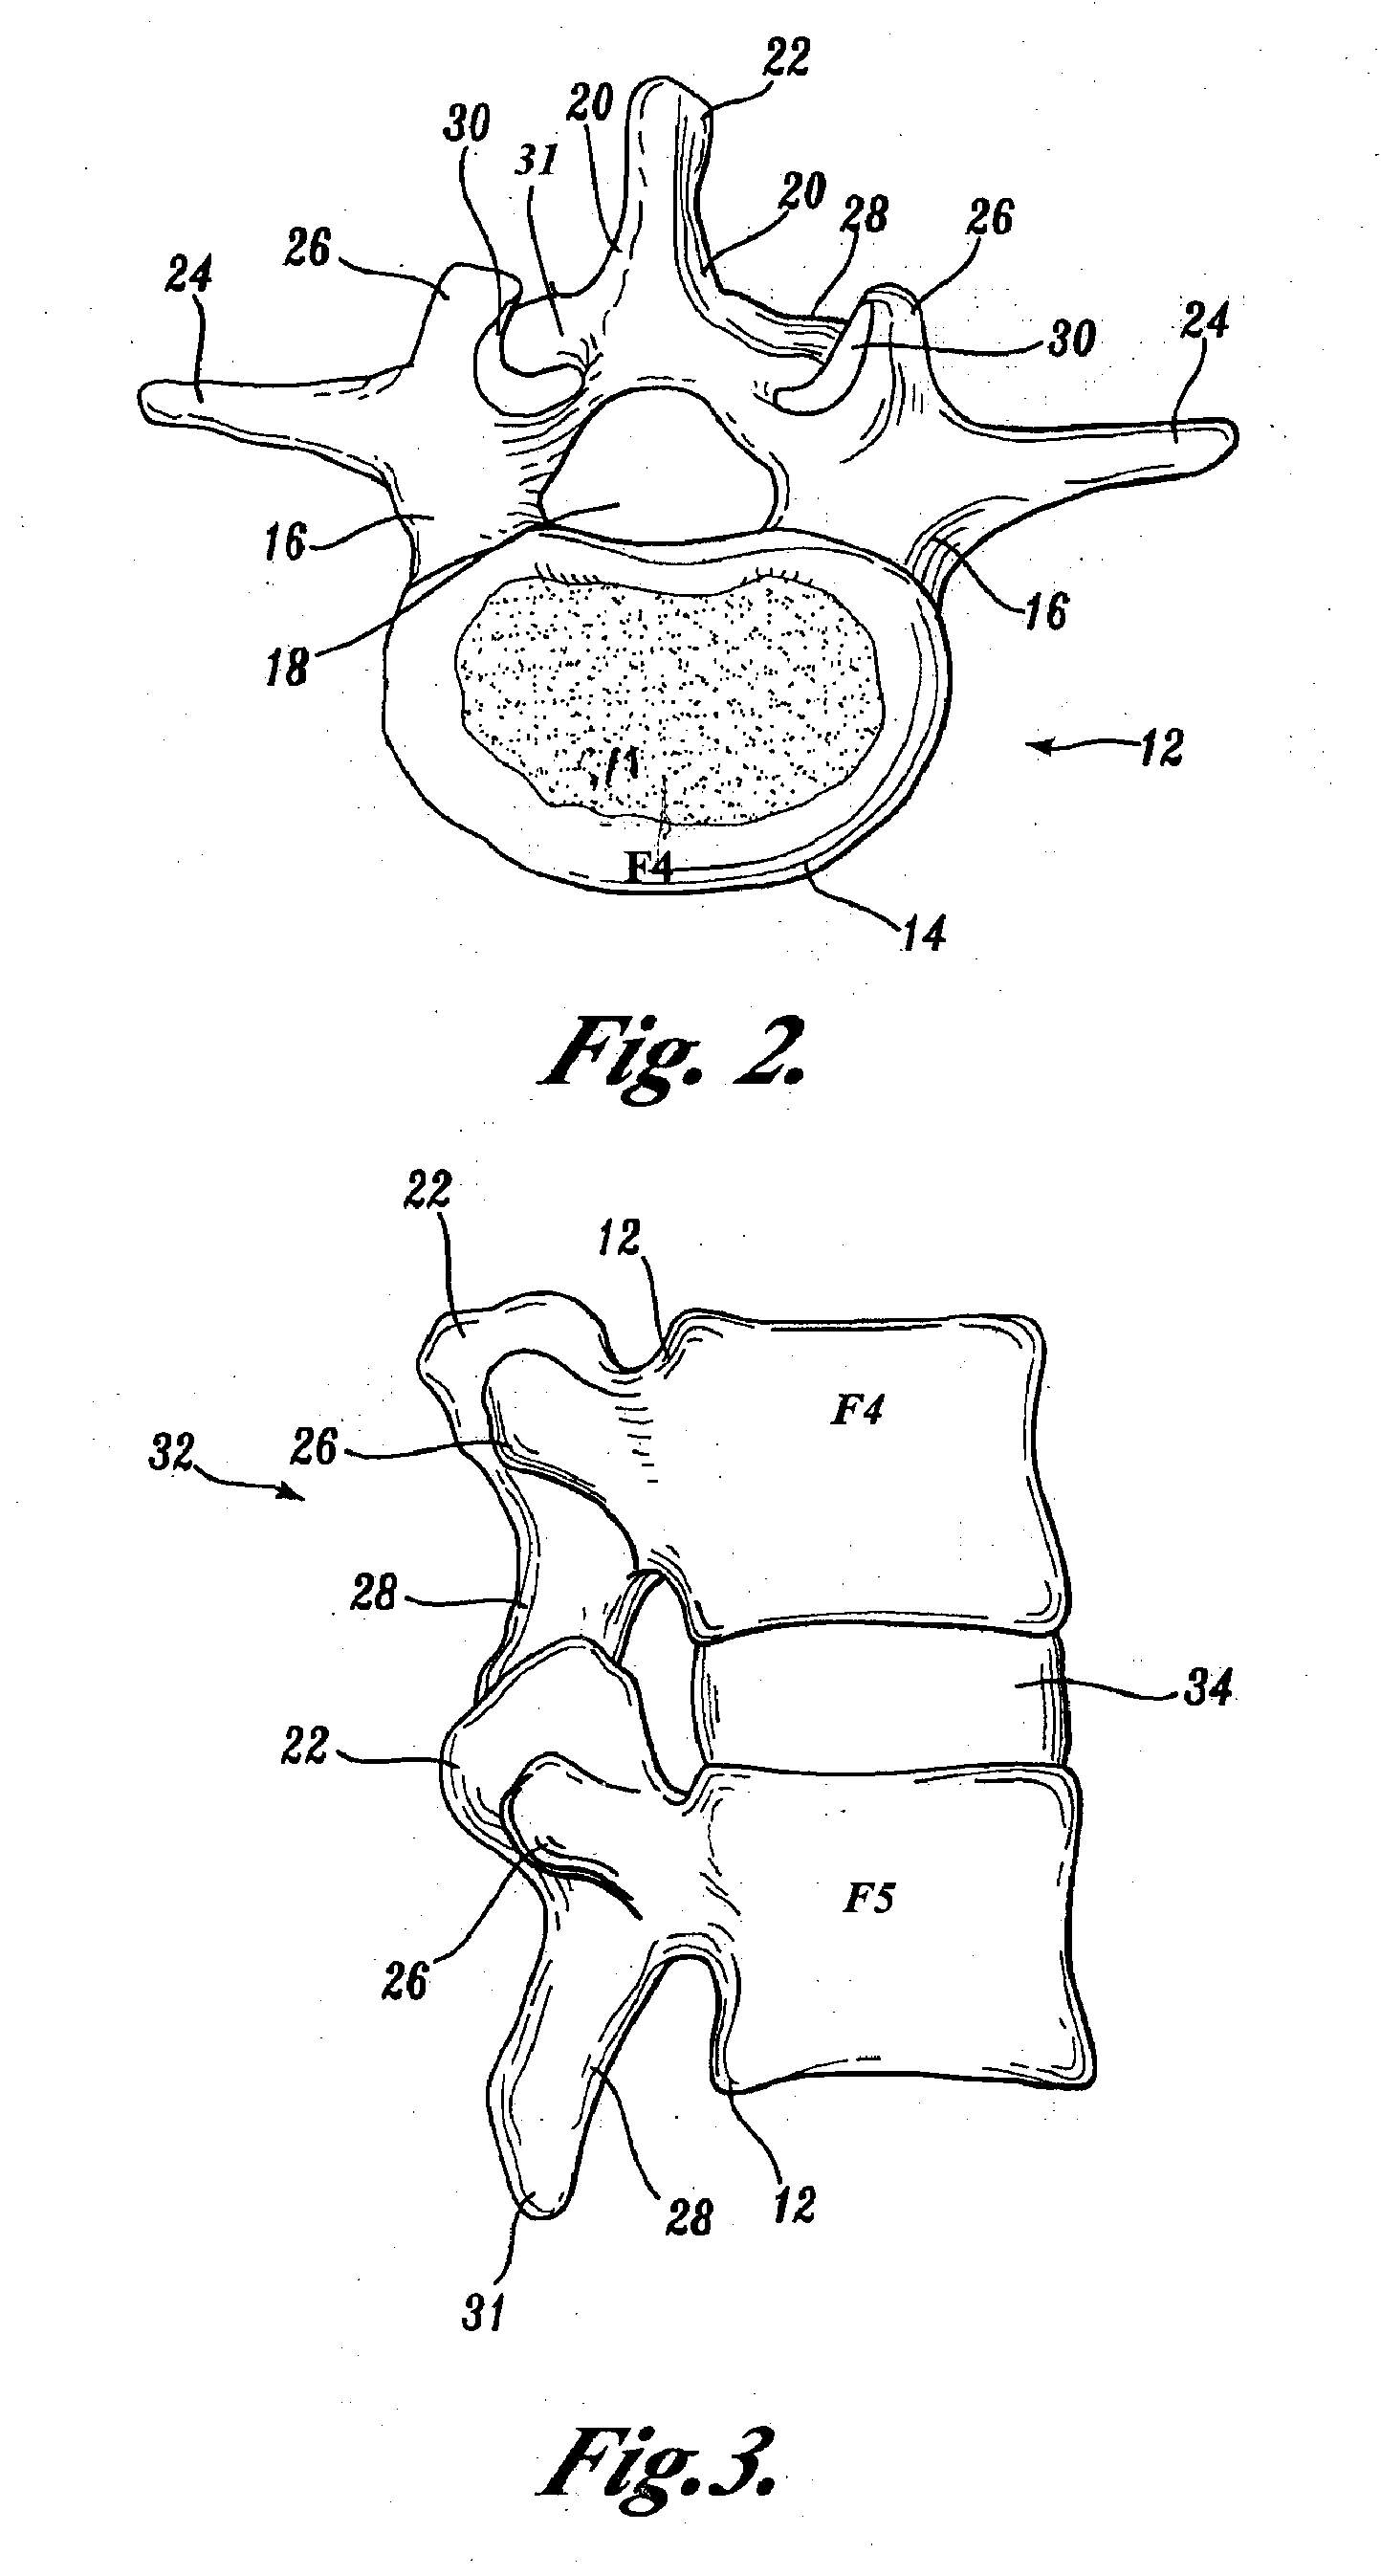 Prostheses, Tools And Methods For Replacement Of Natural Facet Joints With Artificial Facet Joint Surfaces